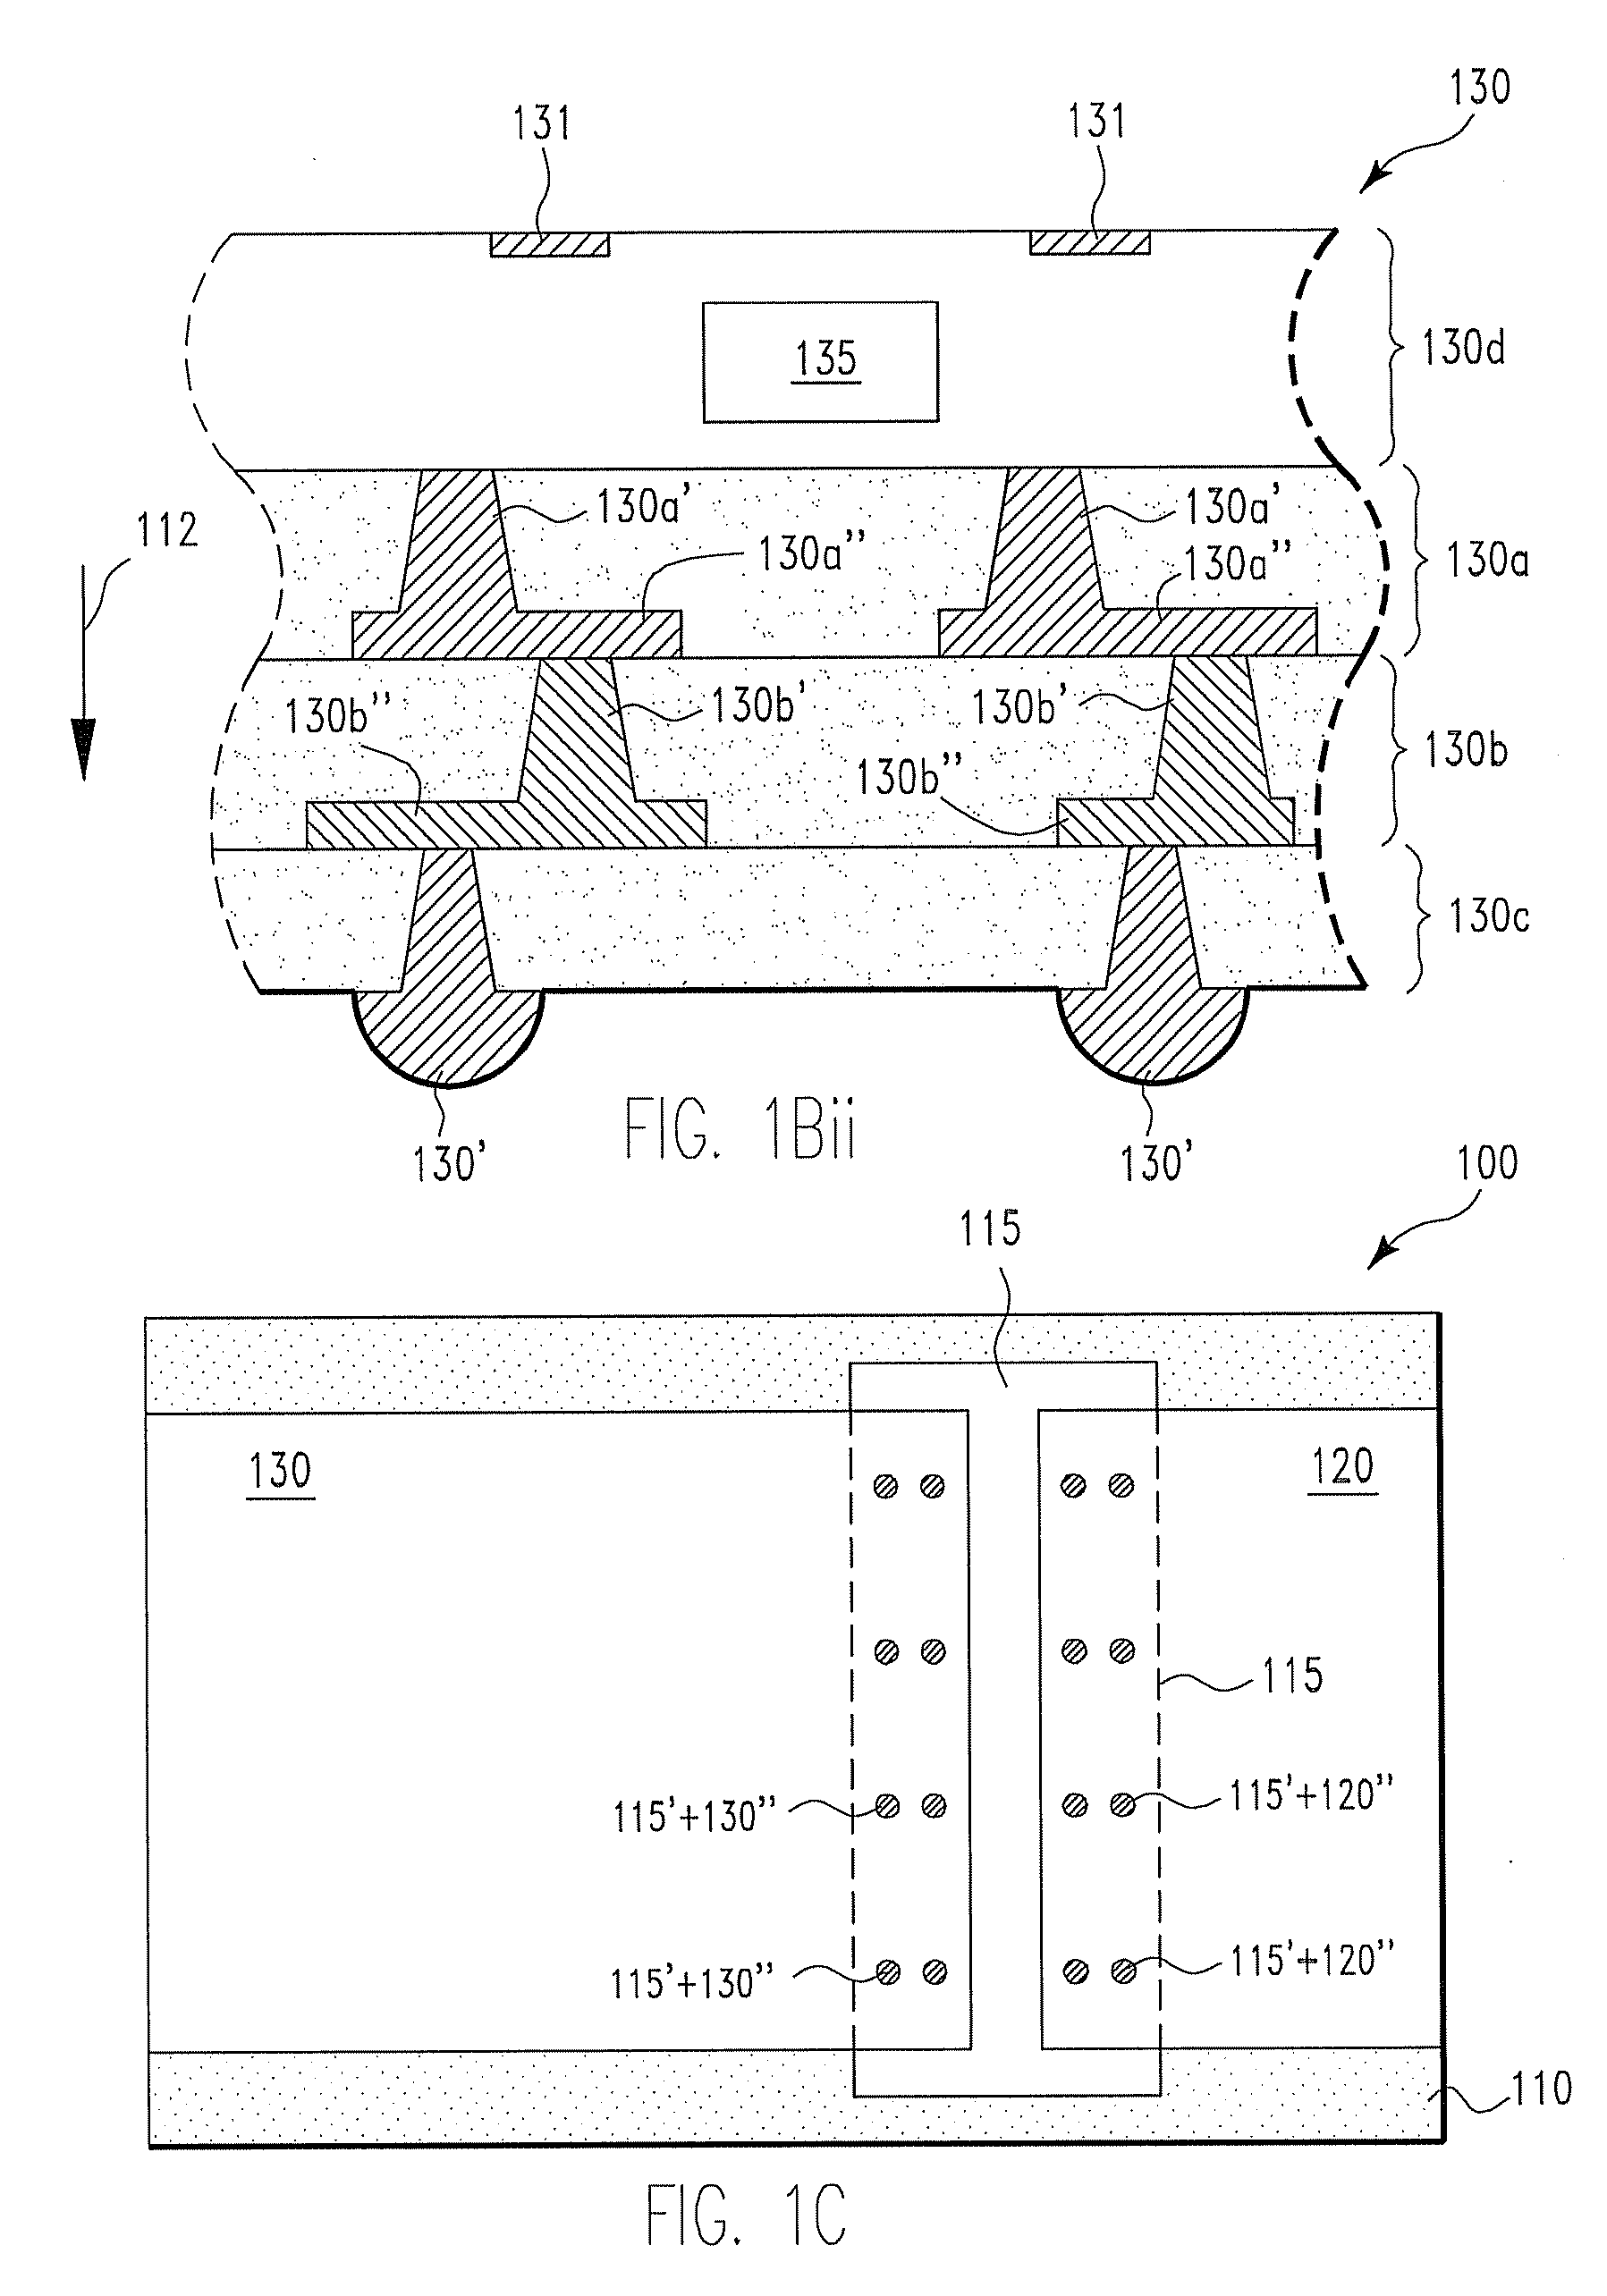 Bridges for interconnecting interposers in multi-chip integrated circuits